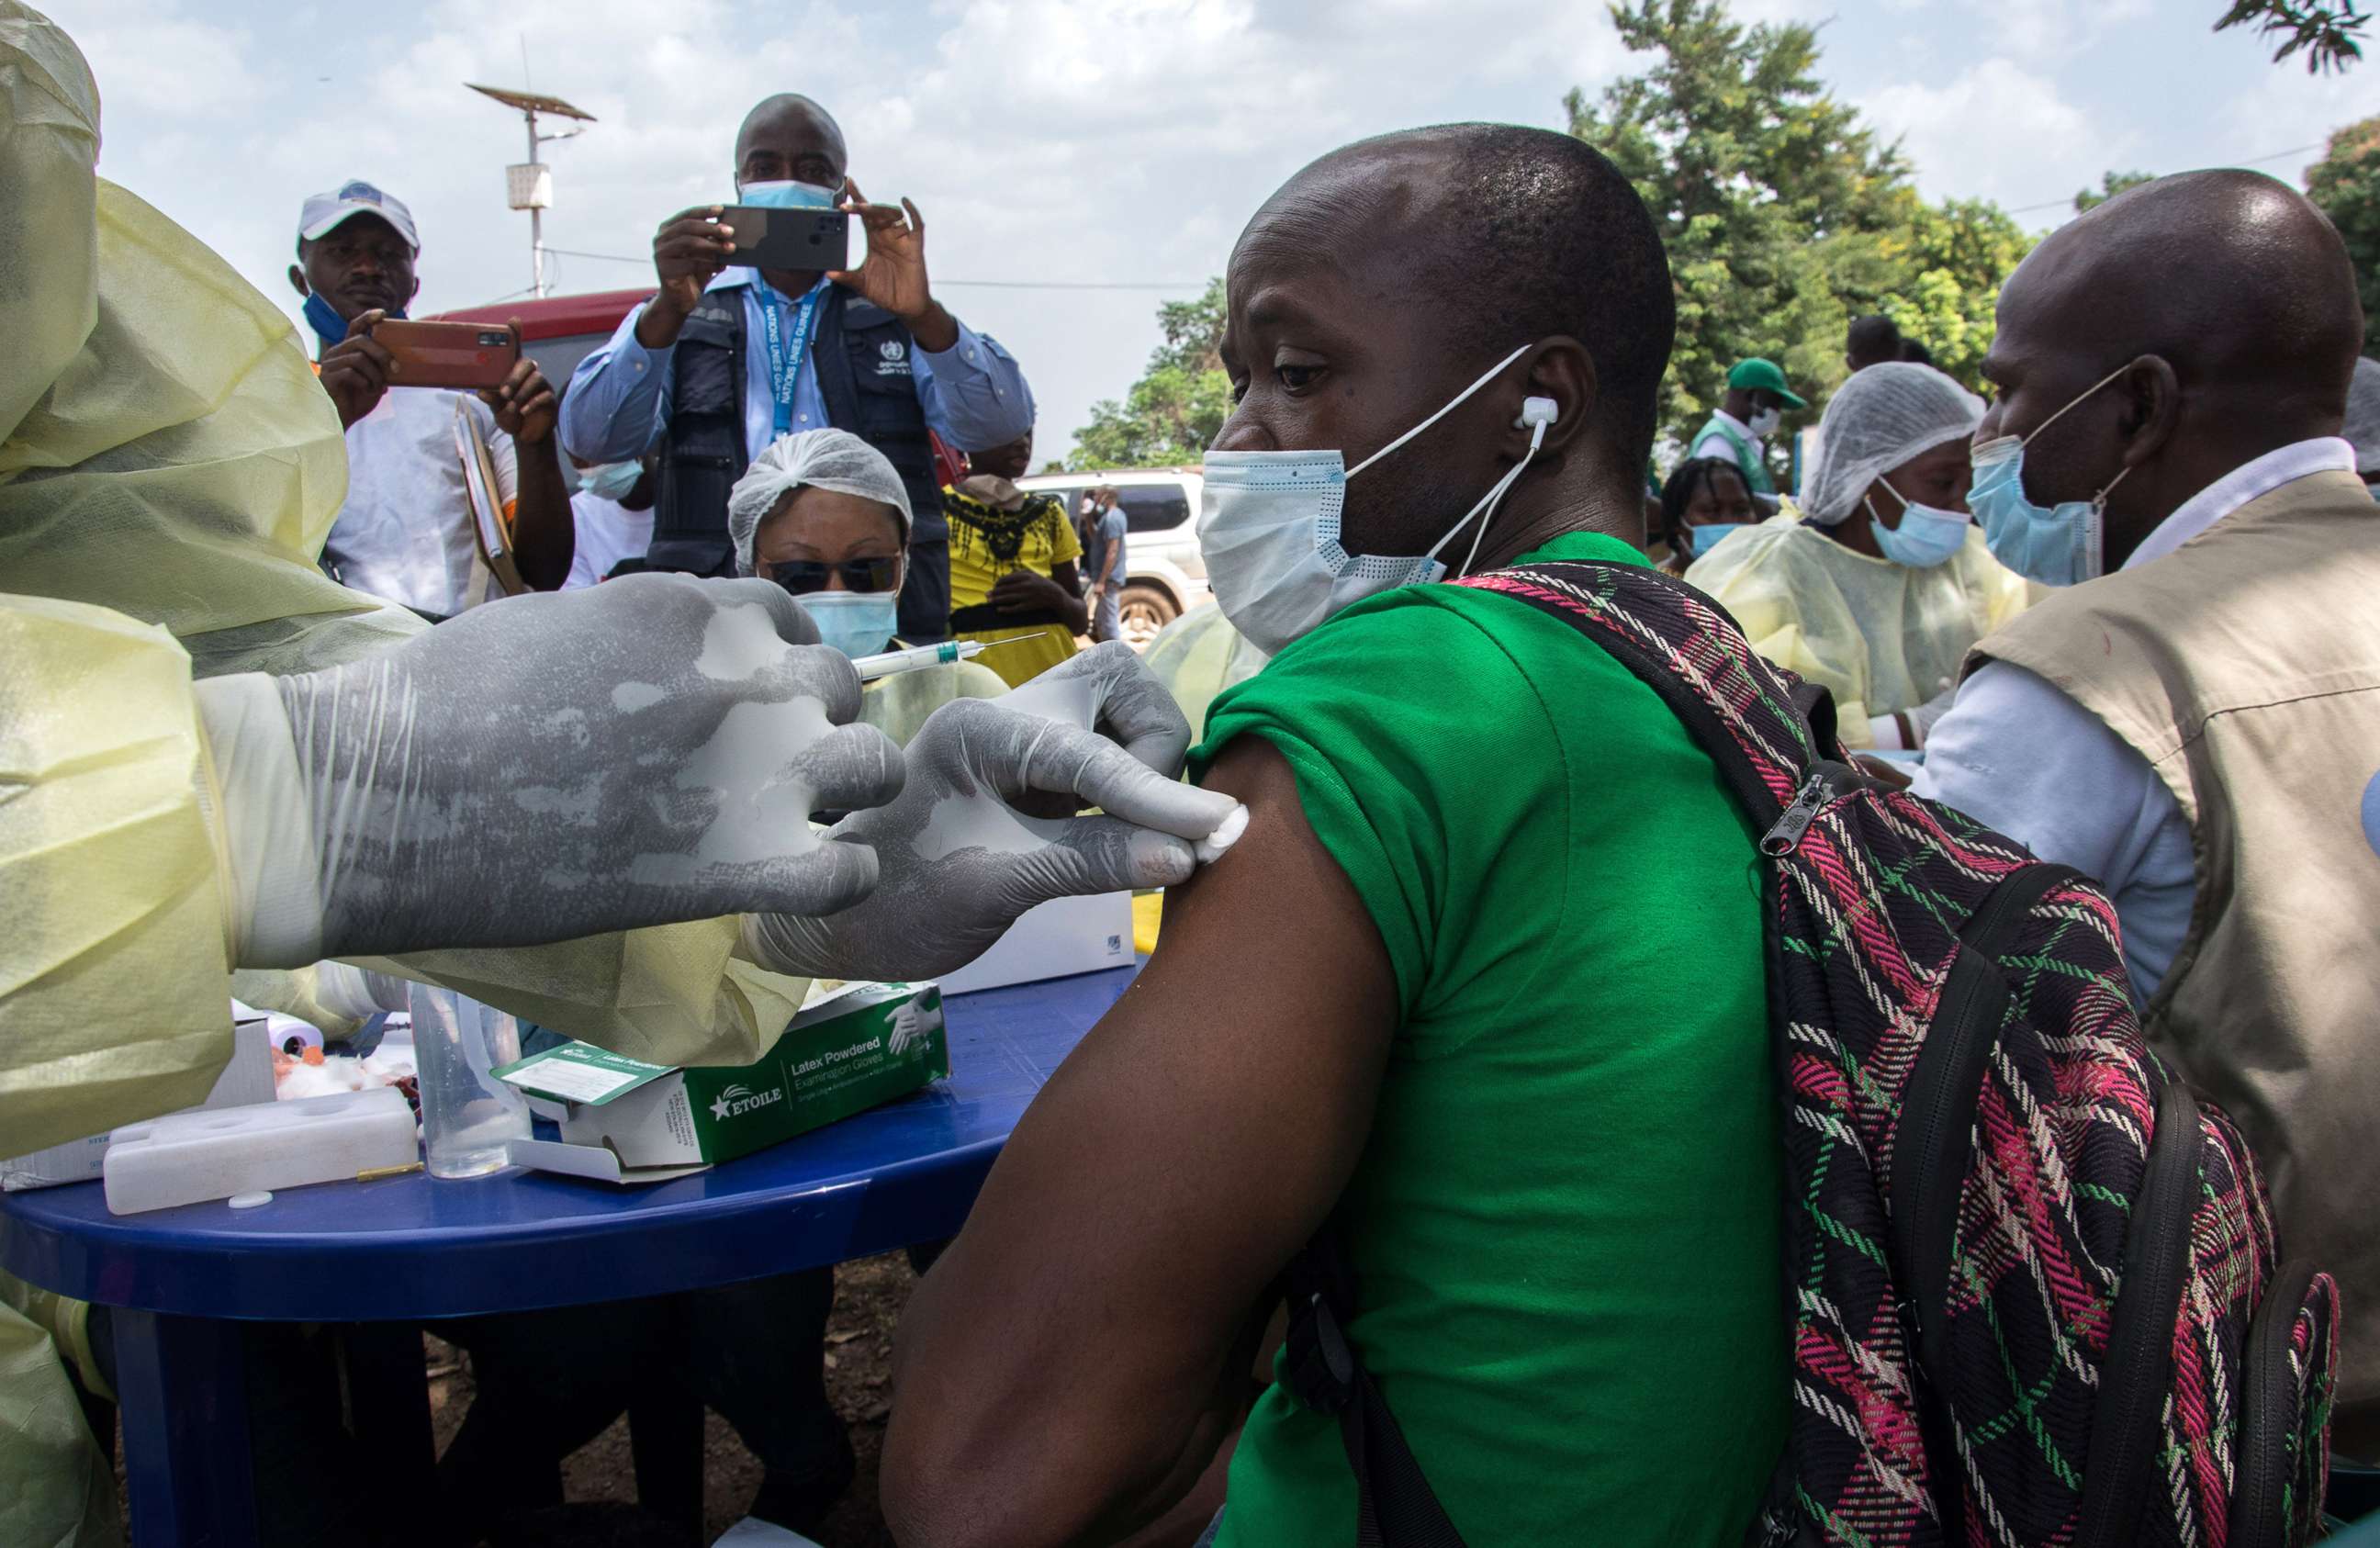 PHOTO: In this Feb. 23, 2021, file photo, a health worker from the Guinean Ministry of Health cleans a suspected contact of an Ebola patient's arm ahead of administering an anti-Ebola vaccine in Gueckedou, Guinea.